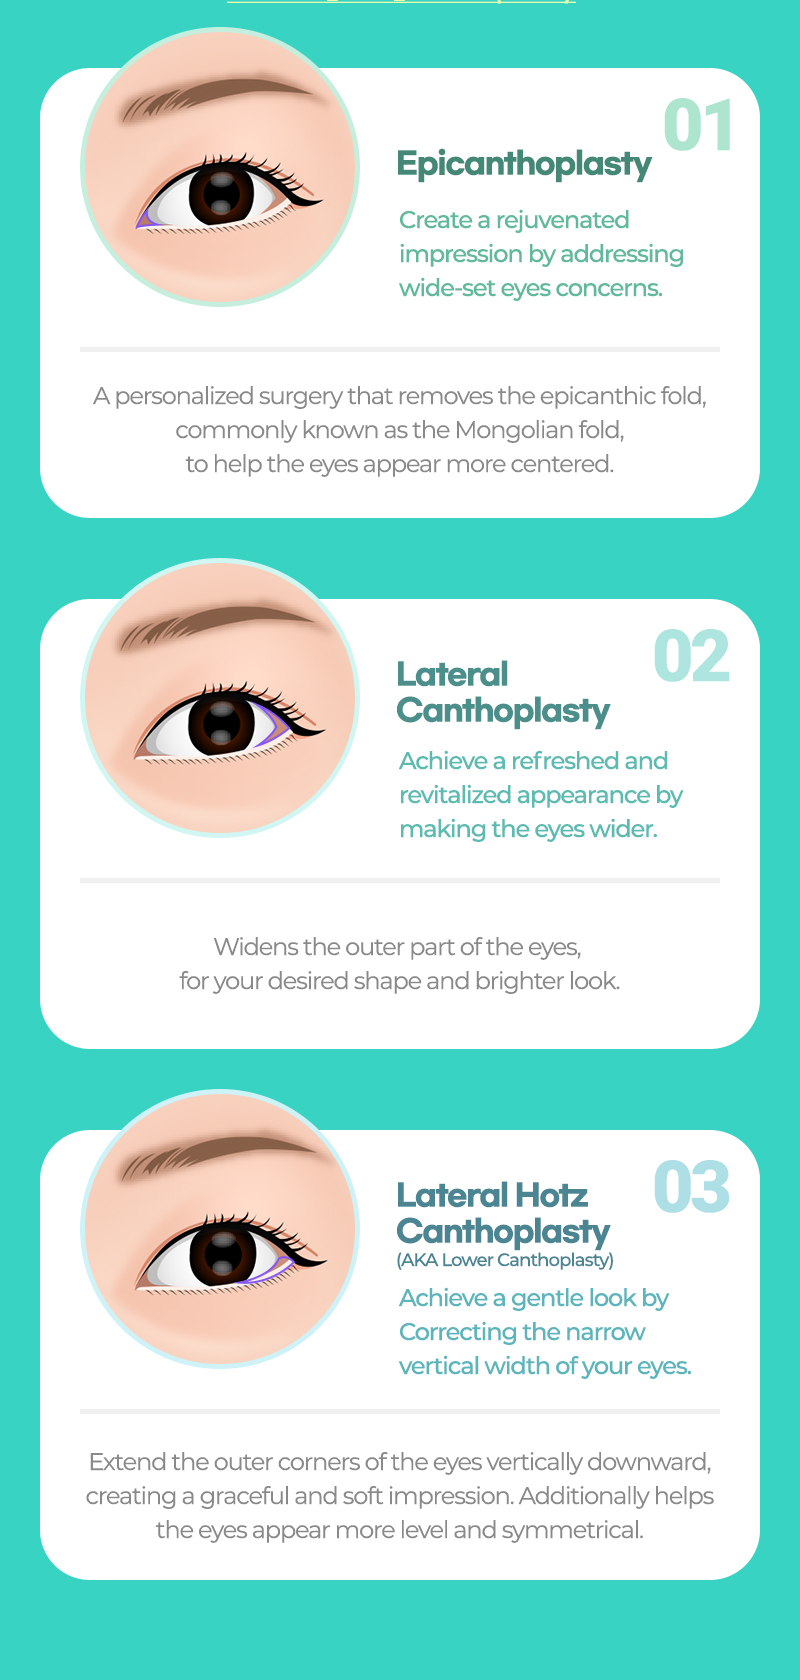 epicanthoplasty Lateral canthoplasty Lateral Hotz canthoplasty